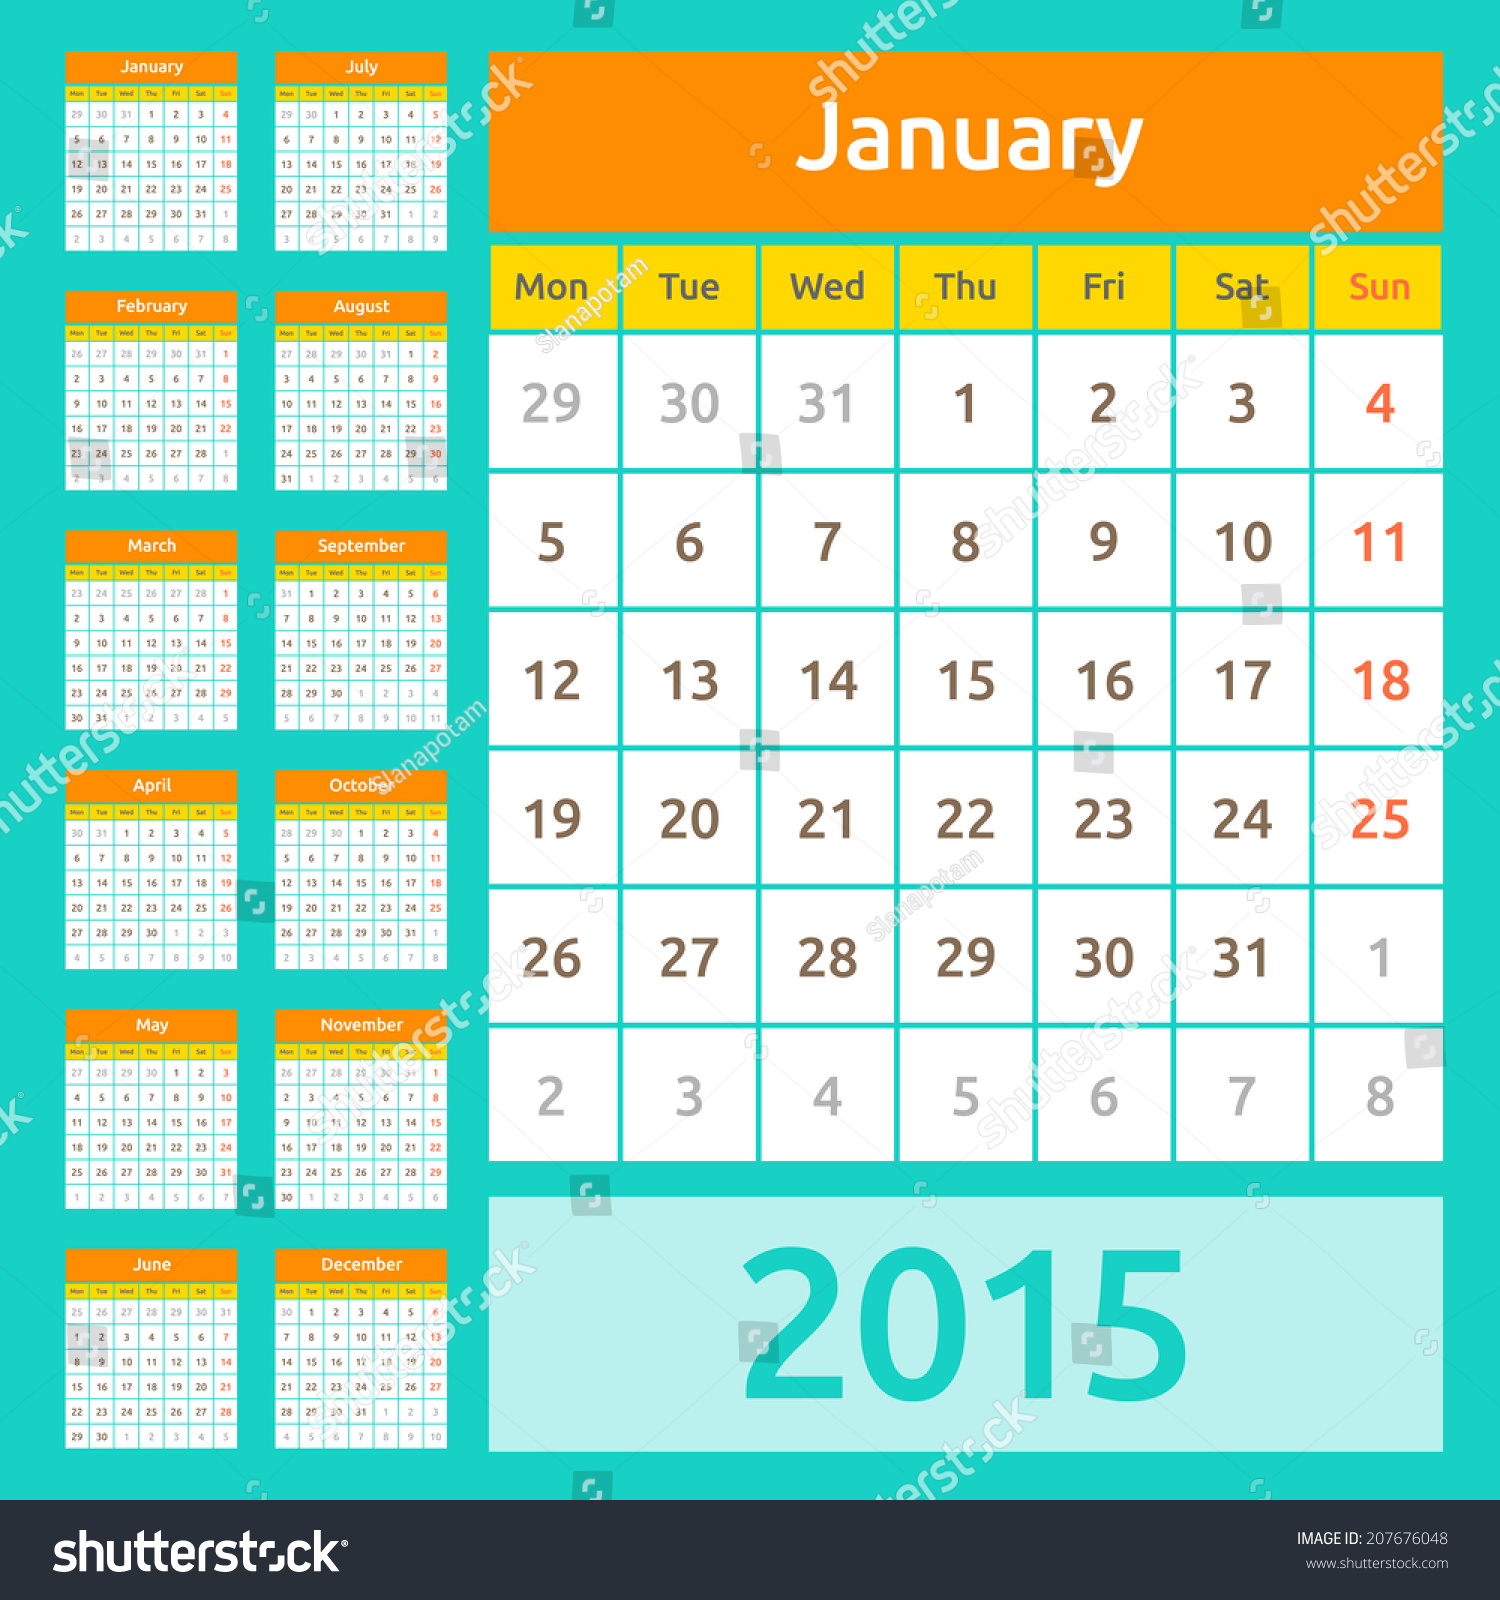 Simple European Calendar Grid For 2015 Year Clean And Neat Only Plain